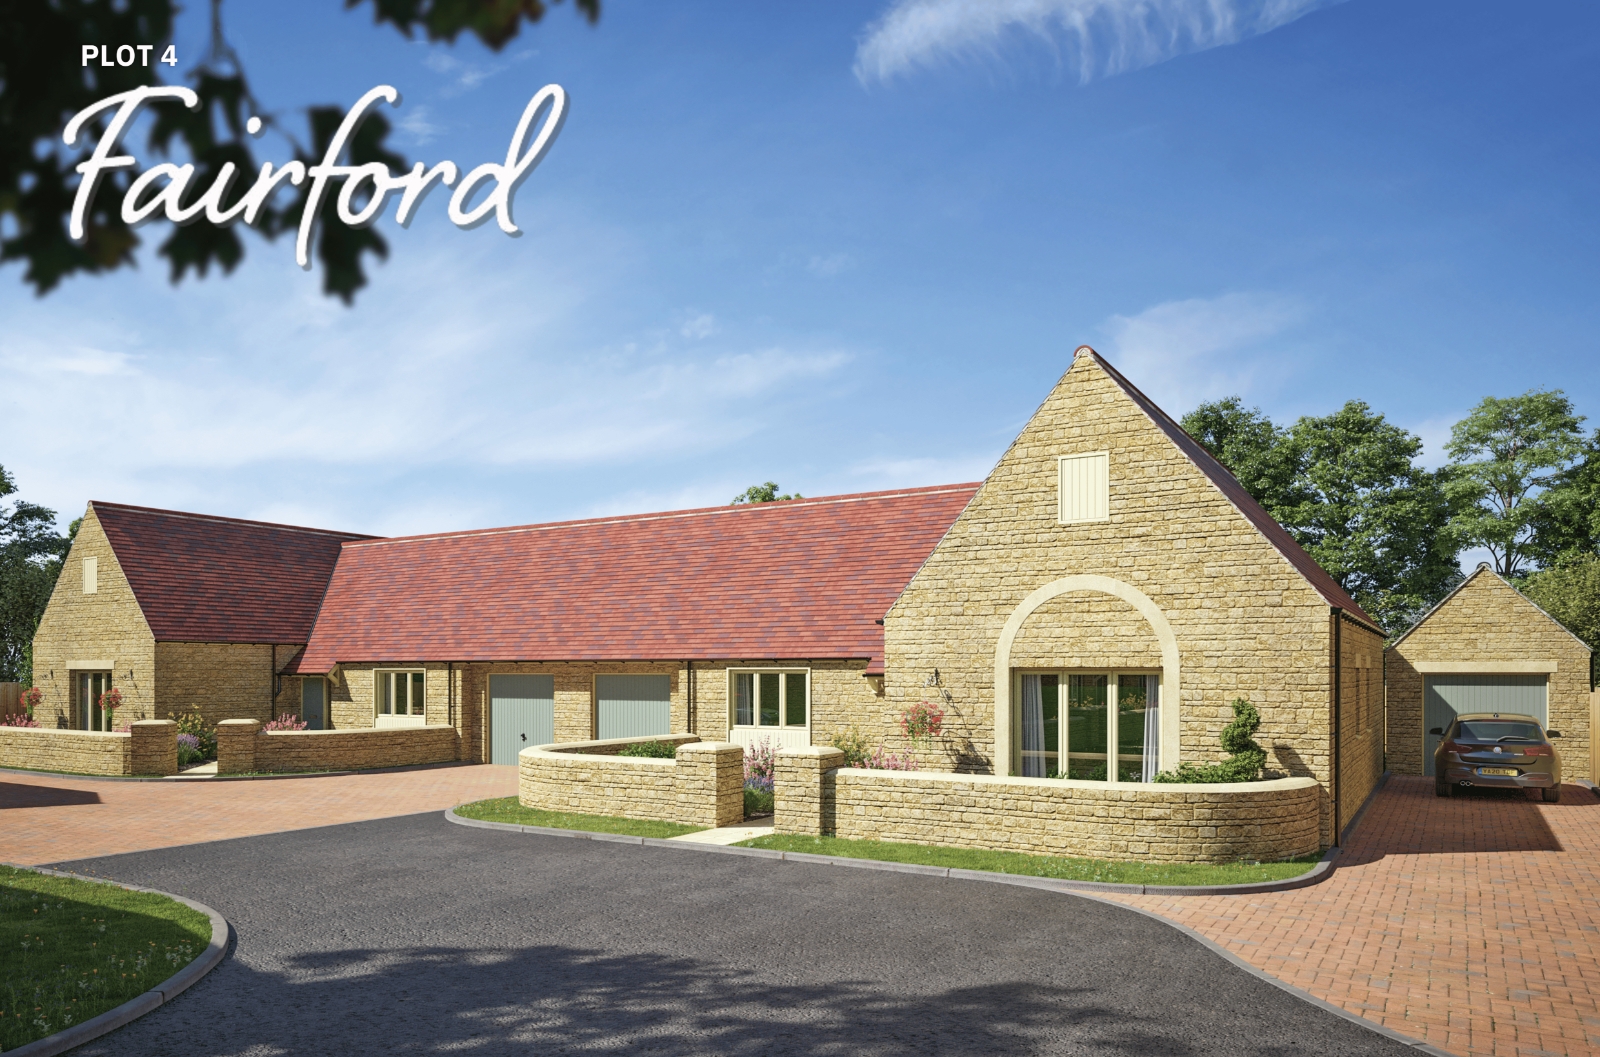 The Croft, Down Ampney, Cirencester, Cotswold, GL7